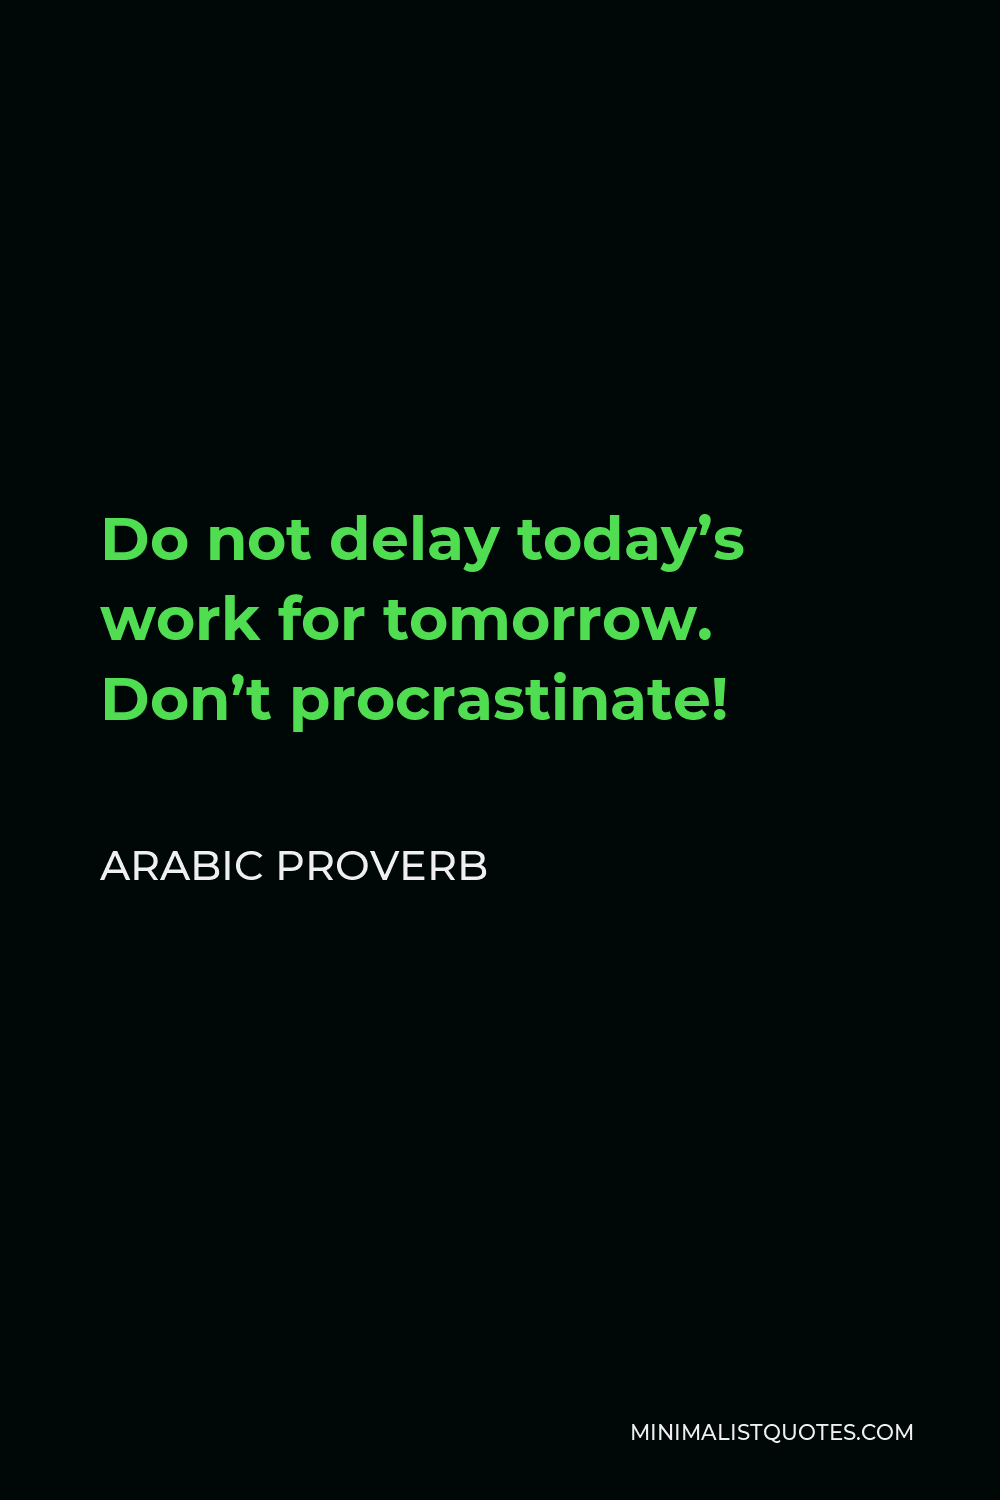 Arabic Proverb Quote - Do not delay today’s work for tomorrow. Don’t procrastinate!